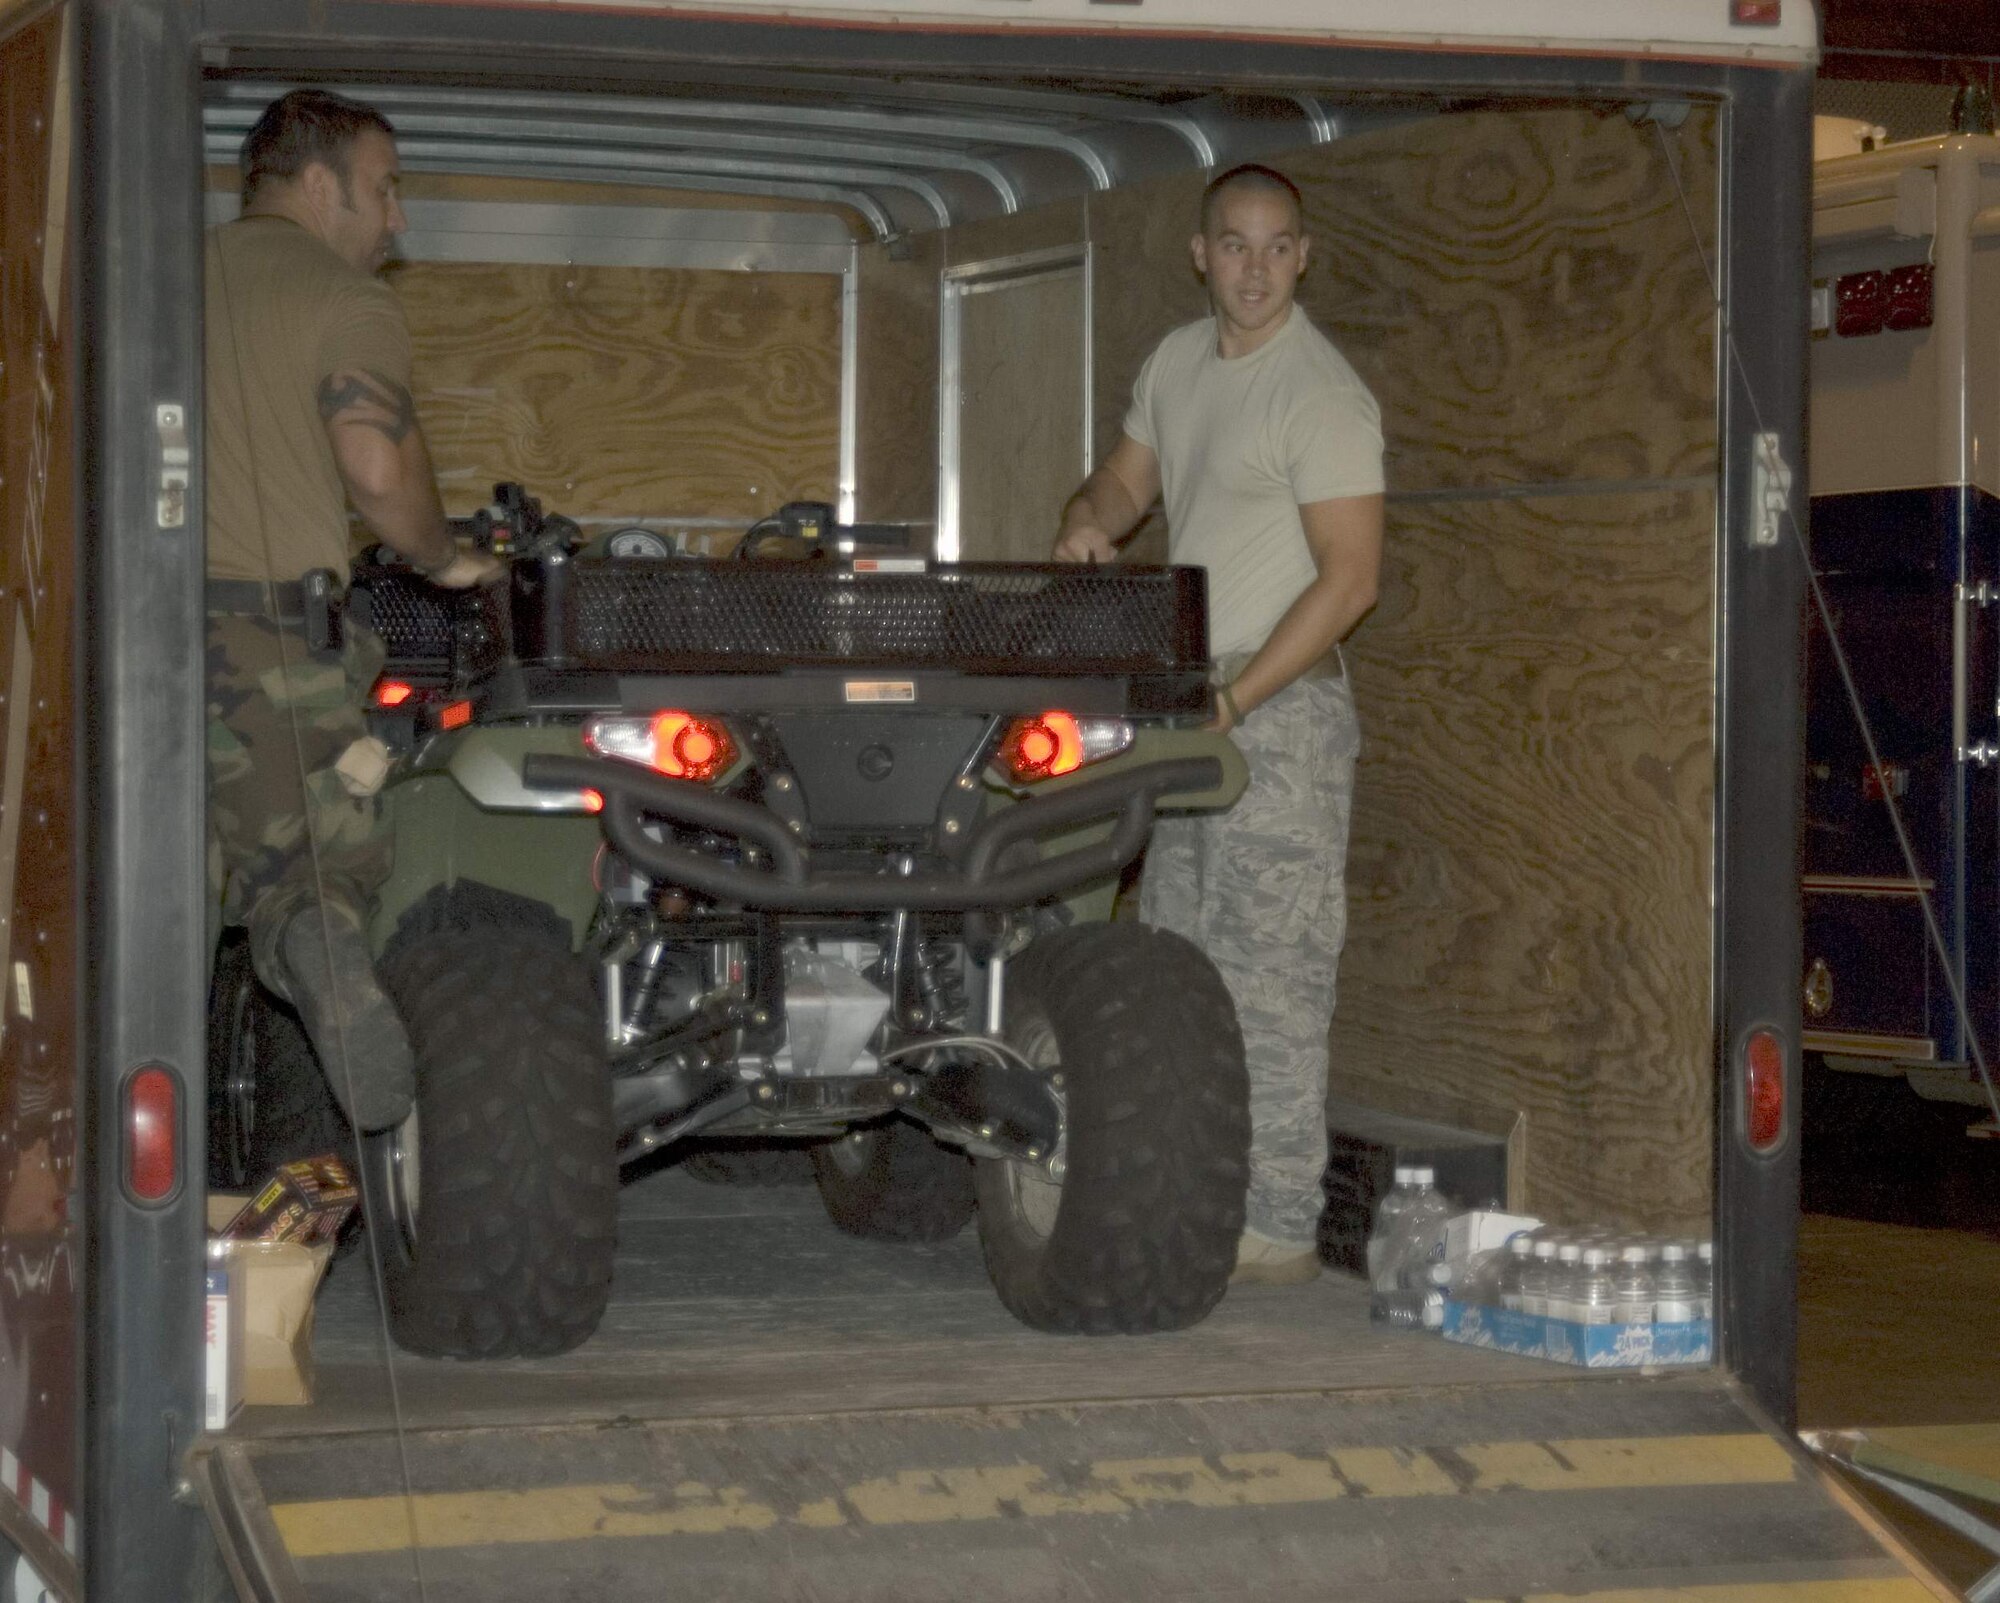 Staff Sgt. James McGregor and Tech. Sgt. Zach Shaffer uncrate an all-terrain vehicle Sept. 12 at the Reliant Center in Houston. The Oregon Air National Guard's 125th Special Tactics Squadron is in Houston to assist with Hurricane Ike relief efforts. Sergeant McGregor is a parachute rigger, and Sergeant Shaffer is a radio maintainer, and both from the 125th STS. (U.S. Air Force photo/Tech. Sgt. Stacy Simon)
